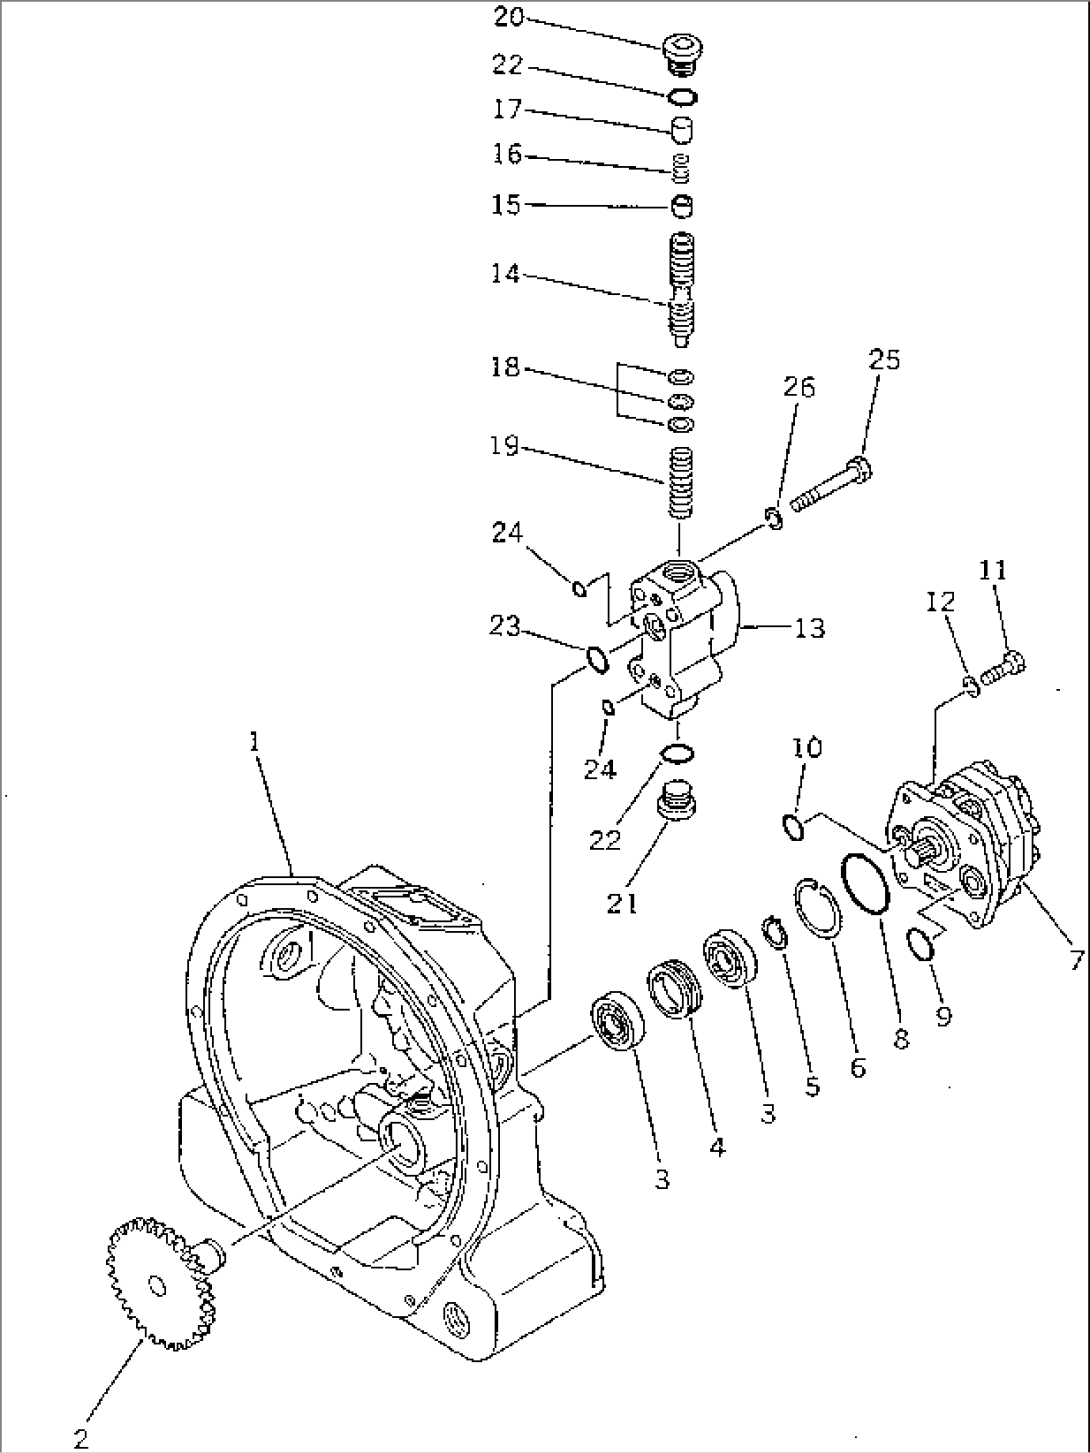 MAIN CLUTCH PUMP DRIVE AND RELIEF VALVE